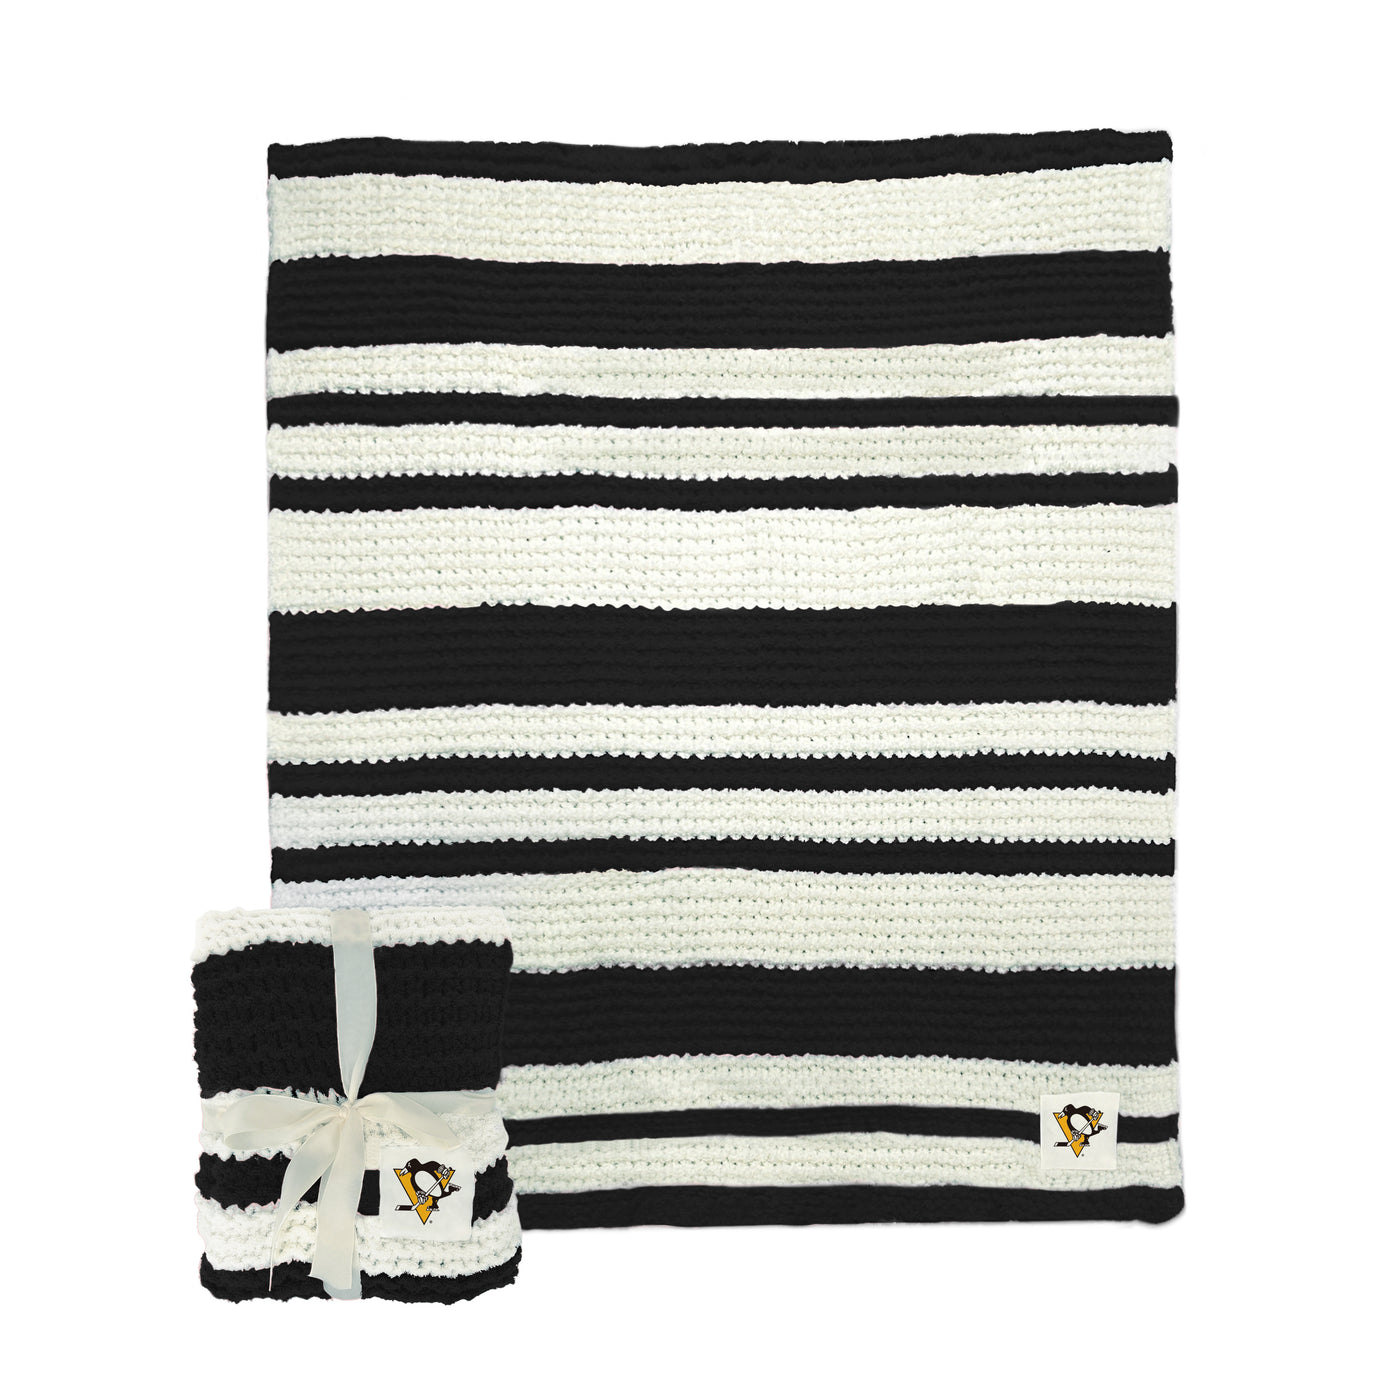 Pittsburgh Penguins Cable Knit Throw 50x60